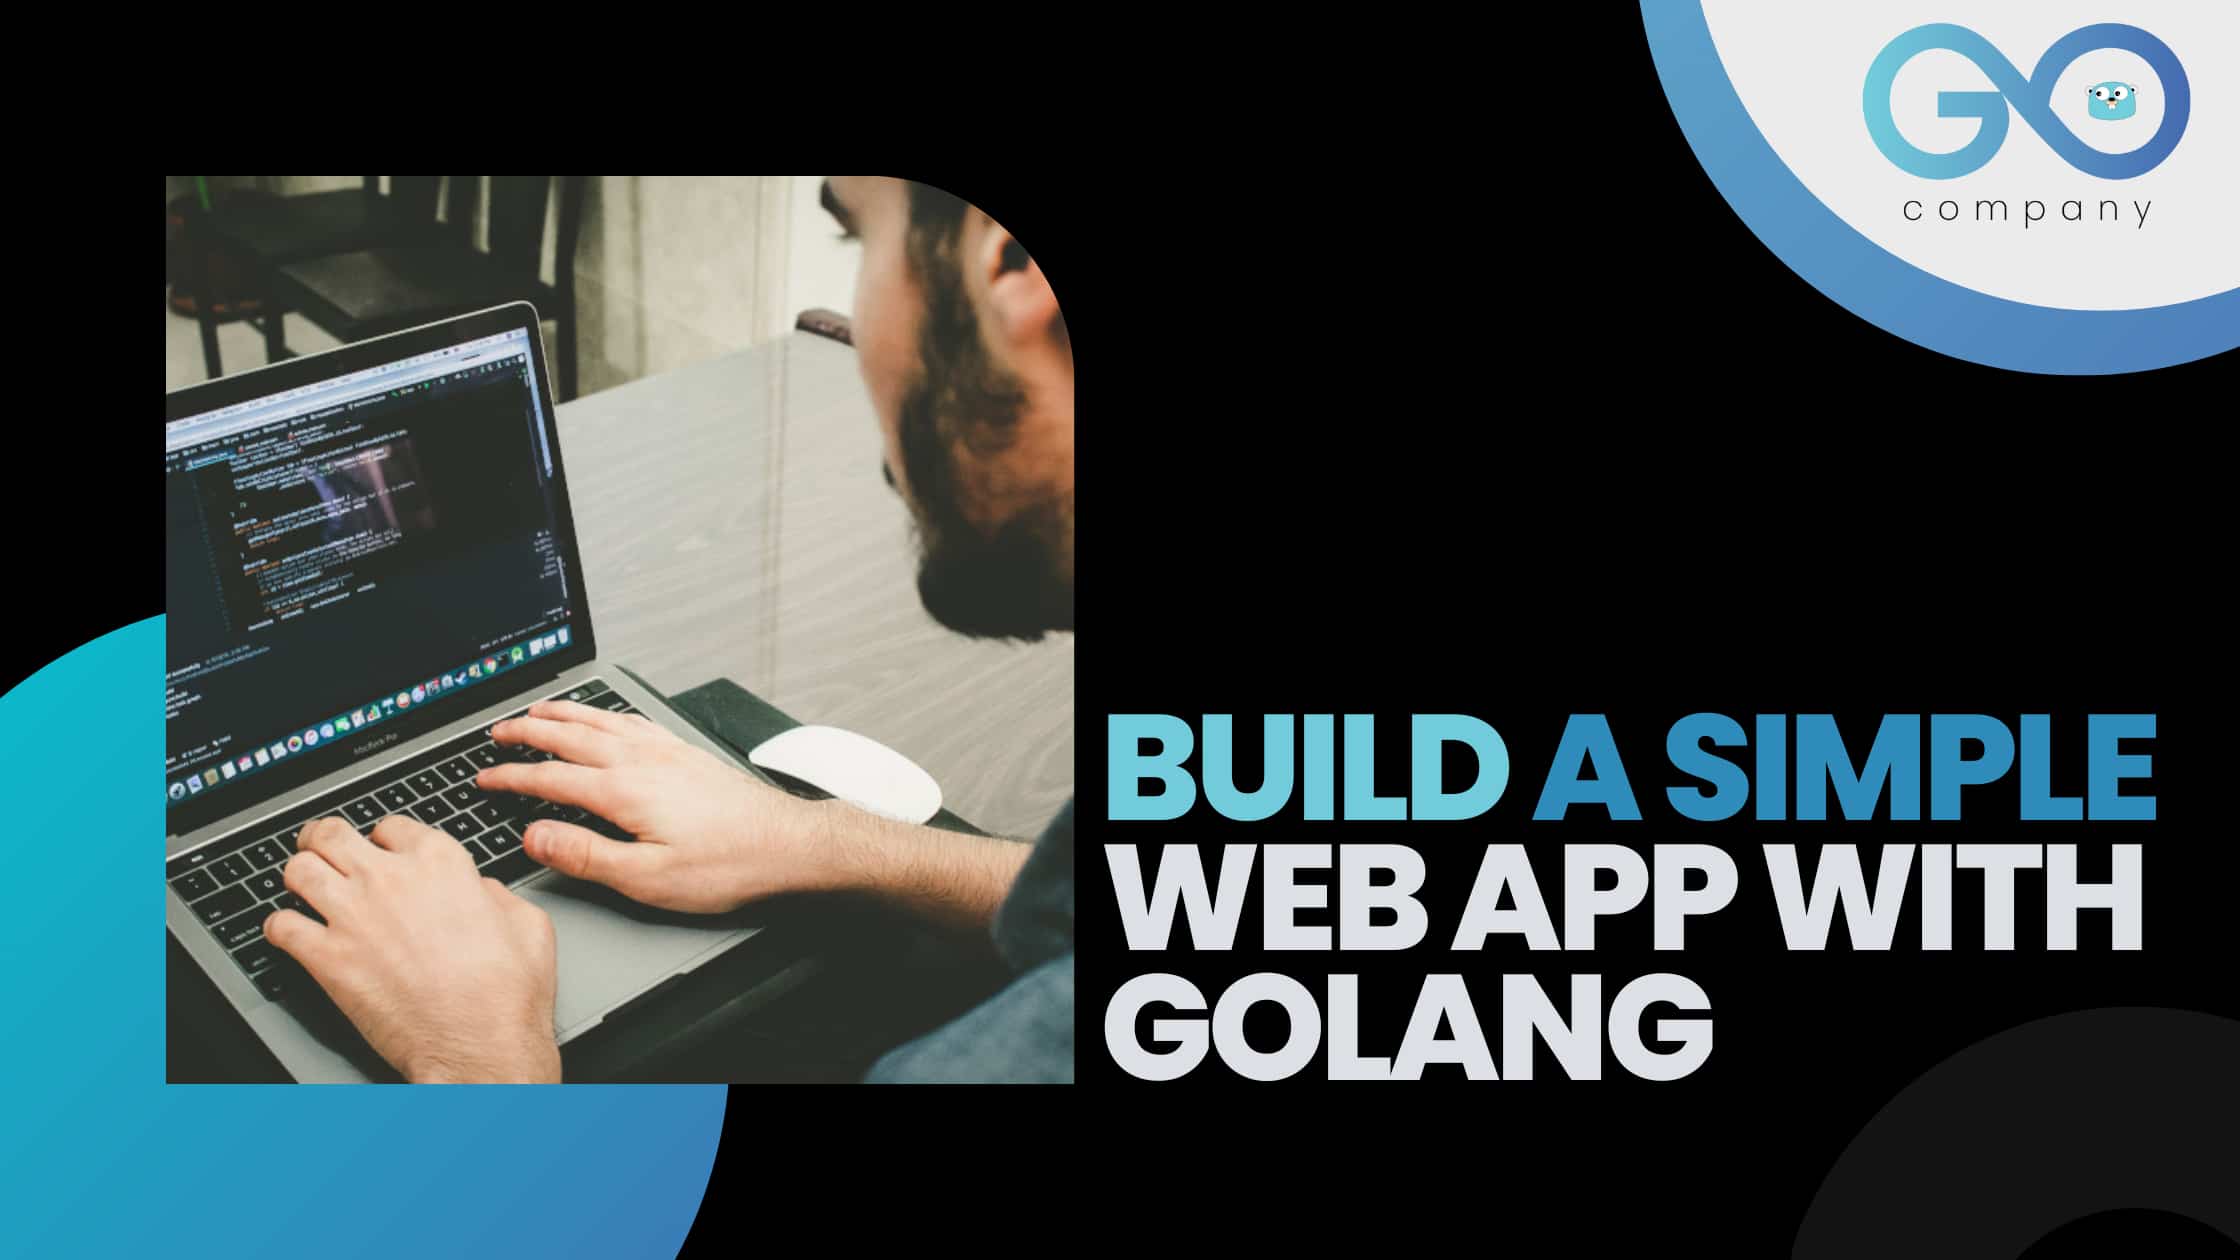 Build a Simple Web App with Golang's picture